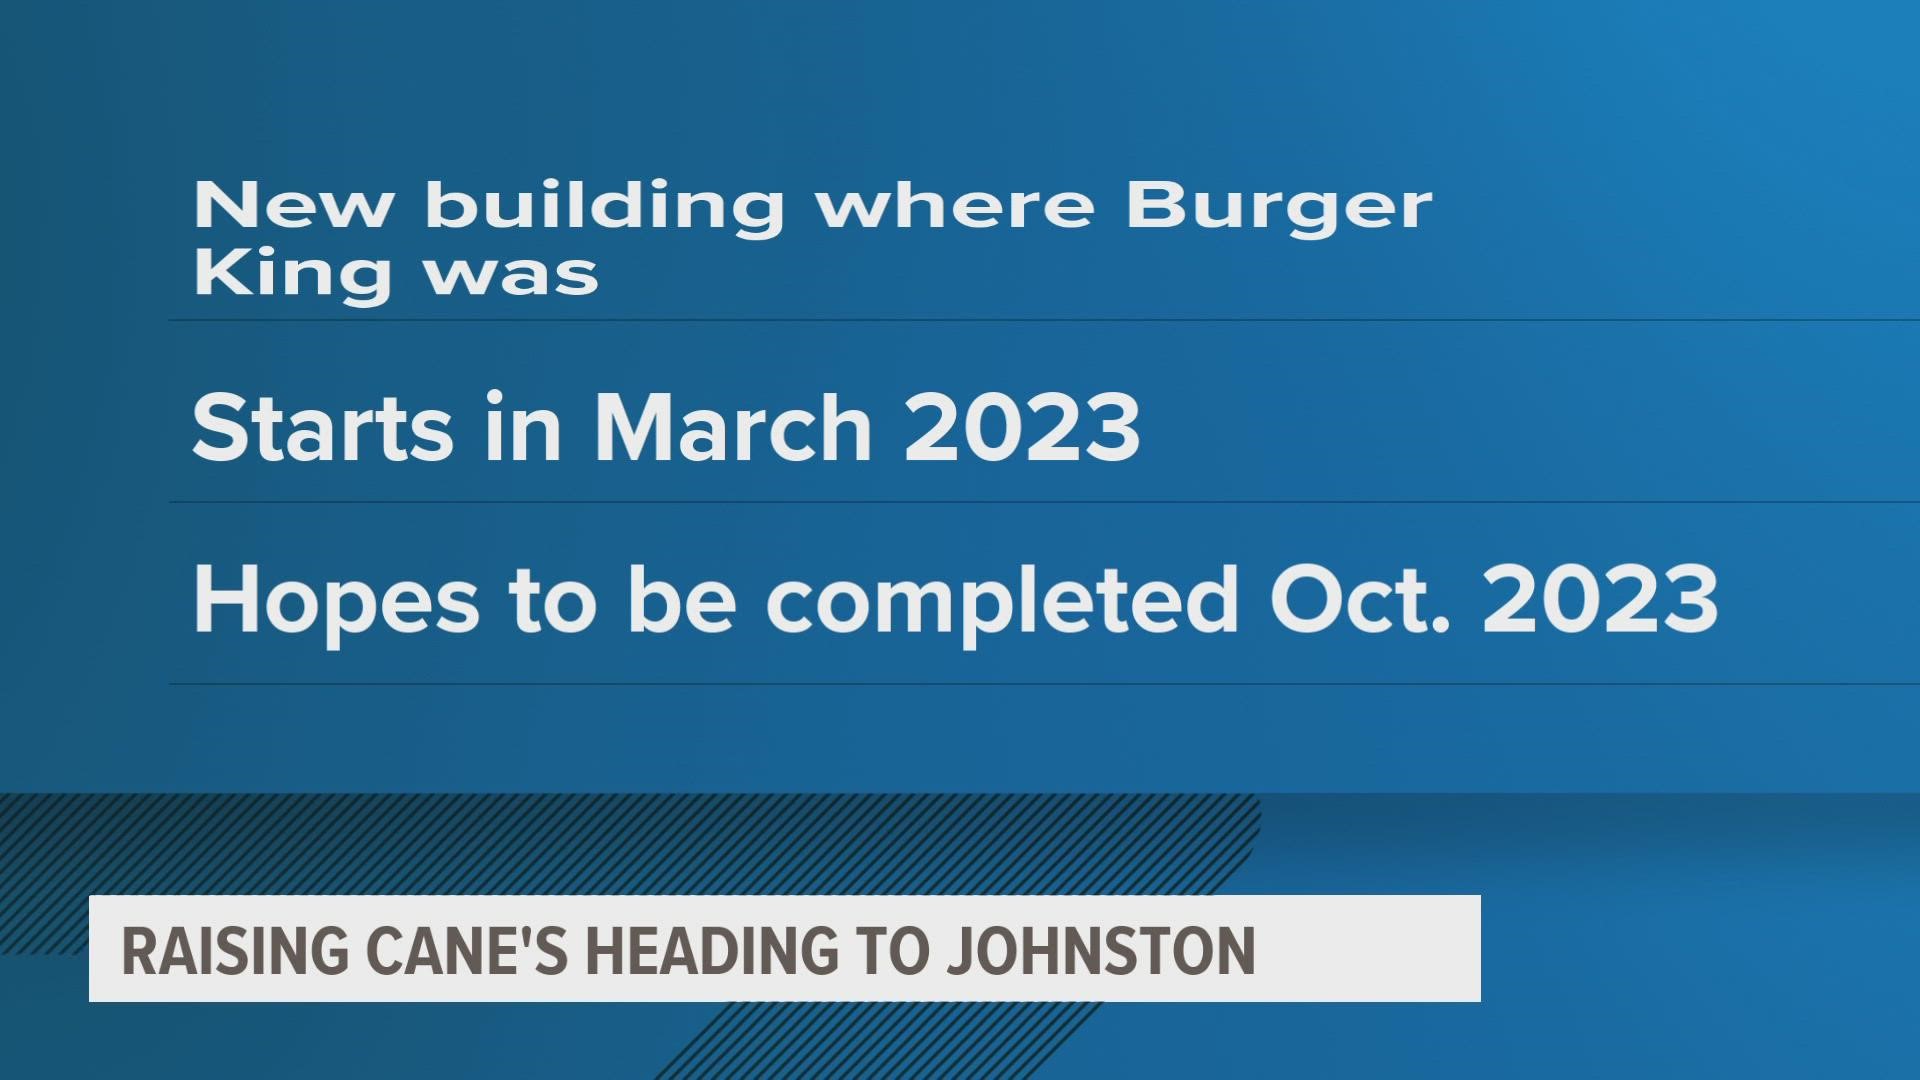 The 3,378 square foot building will be located at 8550 Birchwood Ct., the site of a former Burger King location.